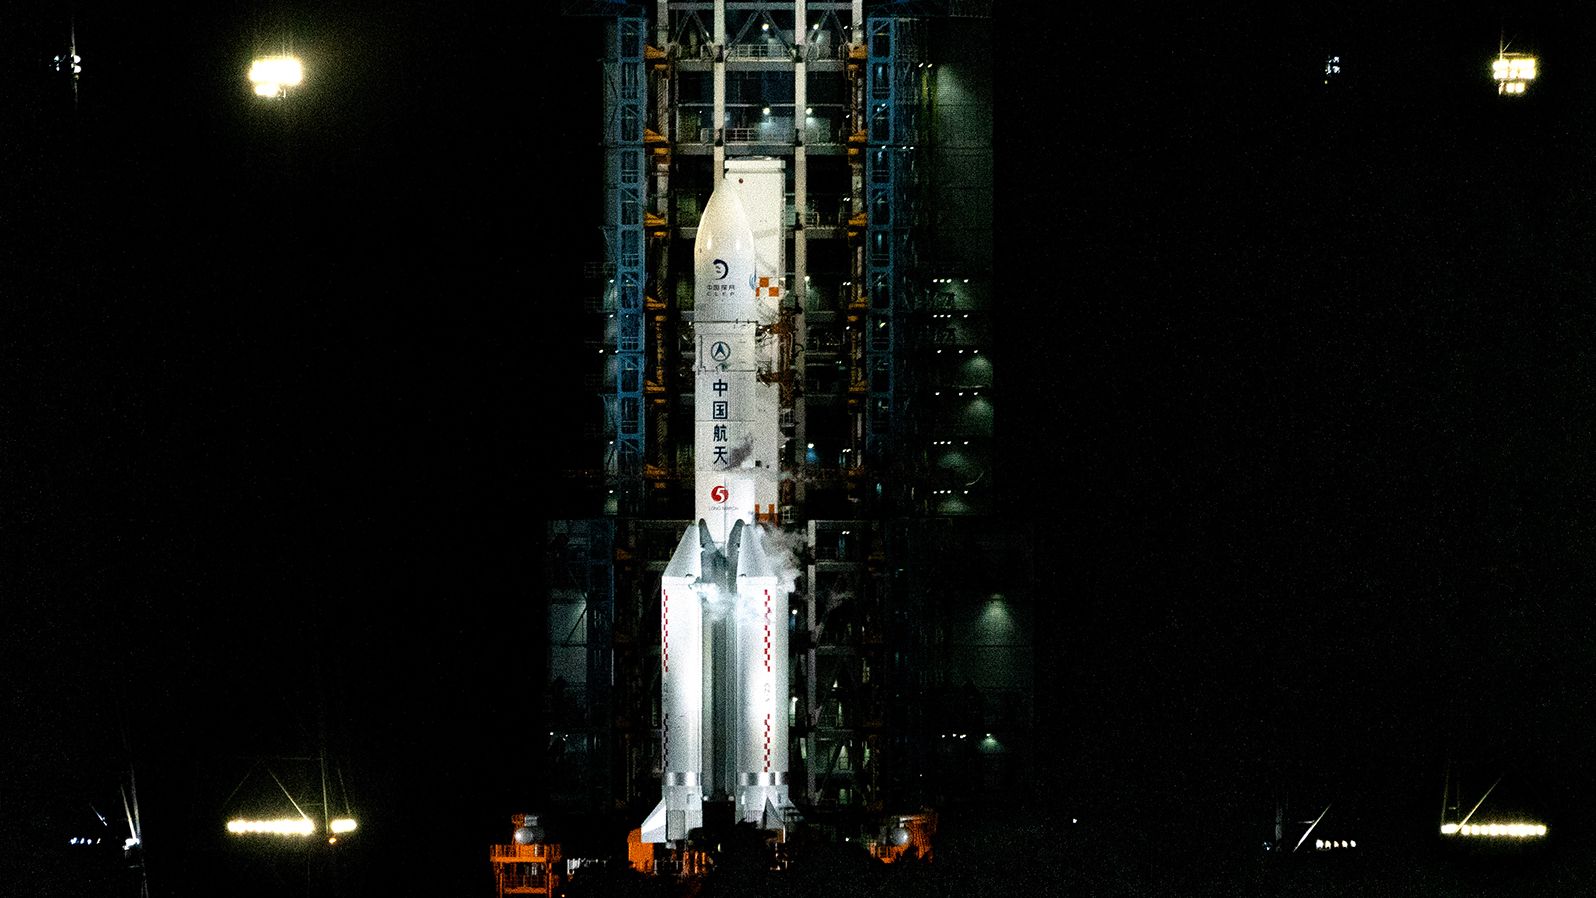 The Long March 5 rocket carrying Chang'e 5 is seen on the launch pad at the Wenchang Space Launch Site on Hainan. 